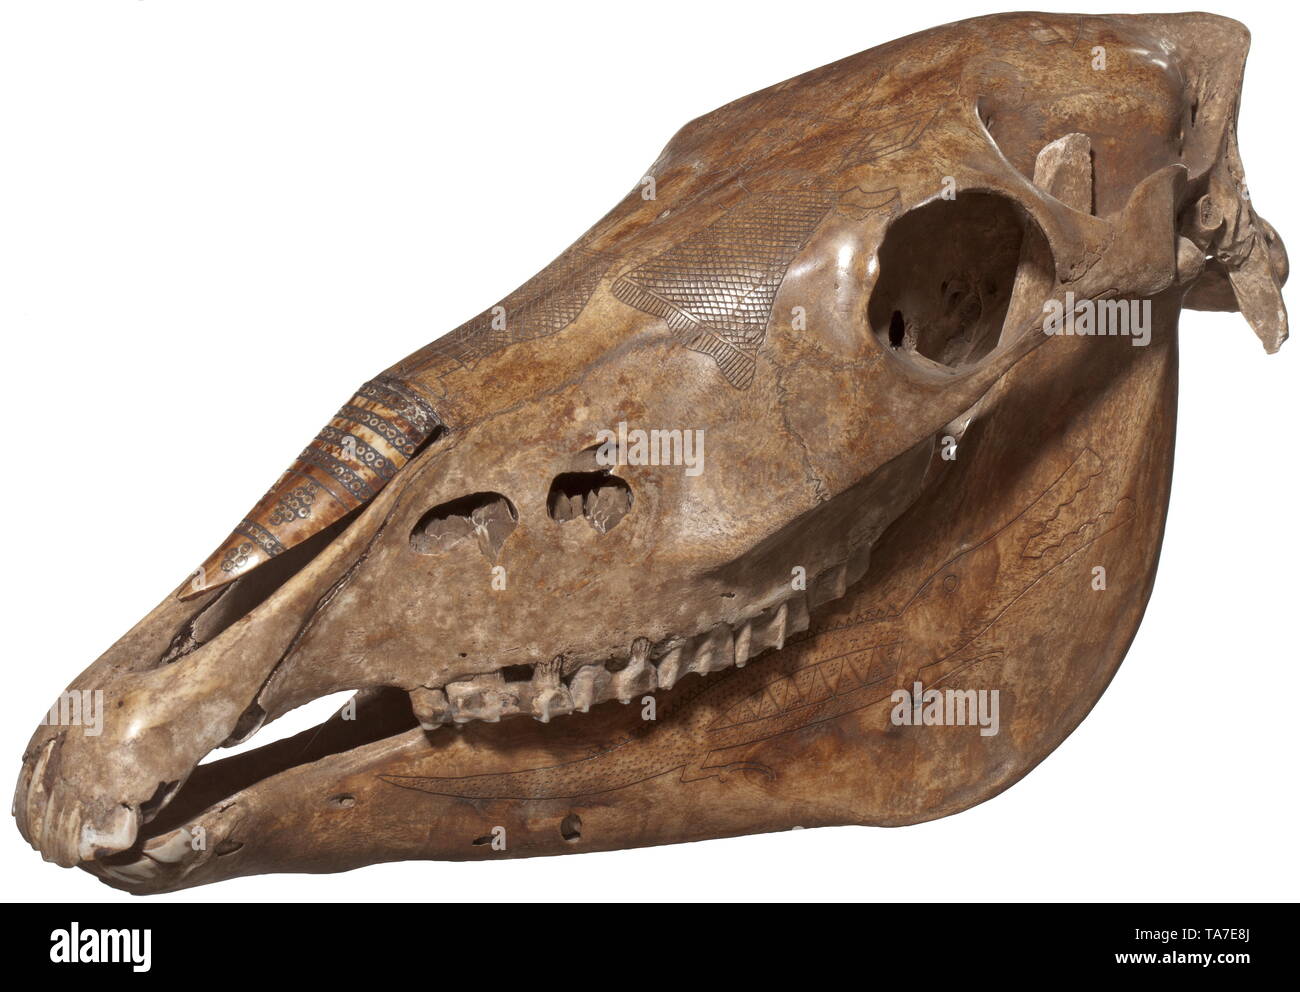 An engraved Timorese horse skull Patinated skull with profuse, finely engraved portrayal of reptiles, on the forehead human figure in orans position under a stylised house, the nasal opening with inserted and ornamentally engraved bone. Length 49 cm. historic, historical, Indonesian archipelago, Indonesia, Far East, Asia, Asian, ethnology, ethnicity, ethnic, tribal, object, objects, stills, clipping, clippings, cut out, cut-out, cut-outs, Additional-Rights-Clearance-Info-Not-Available Stock Photo